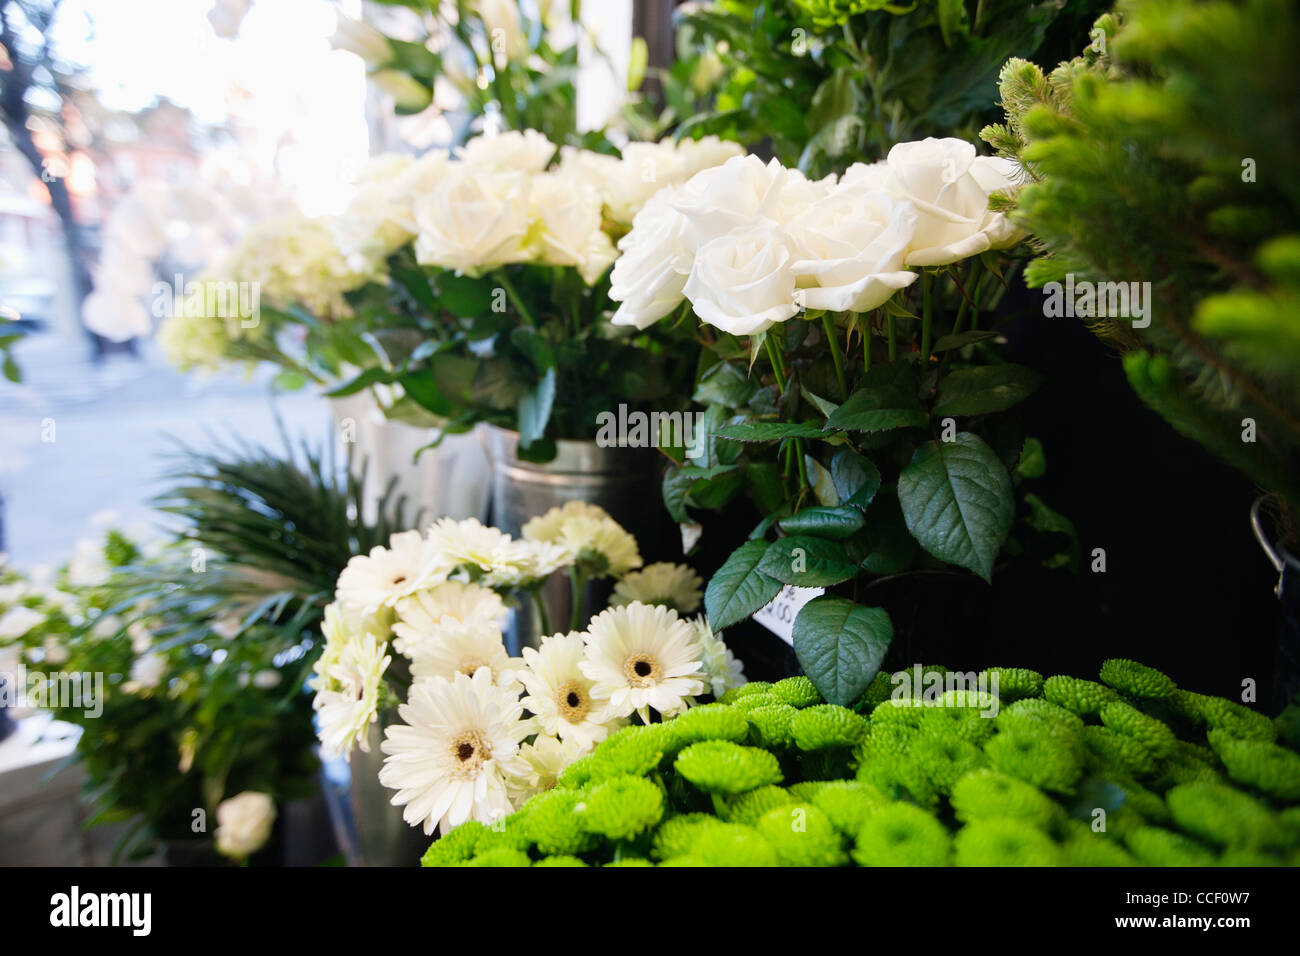 Bunch of fresh flowers at florist shop Stock Photo